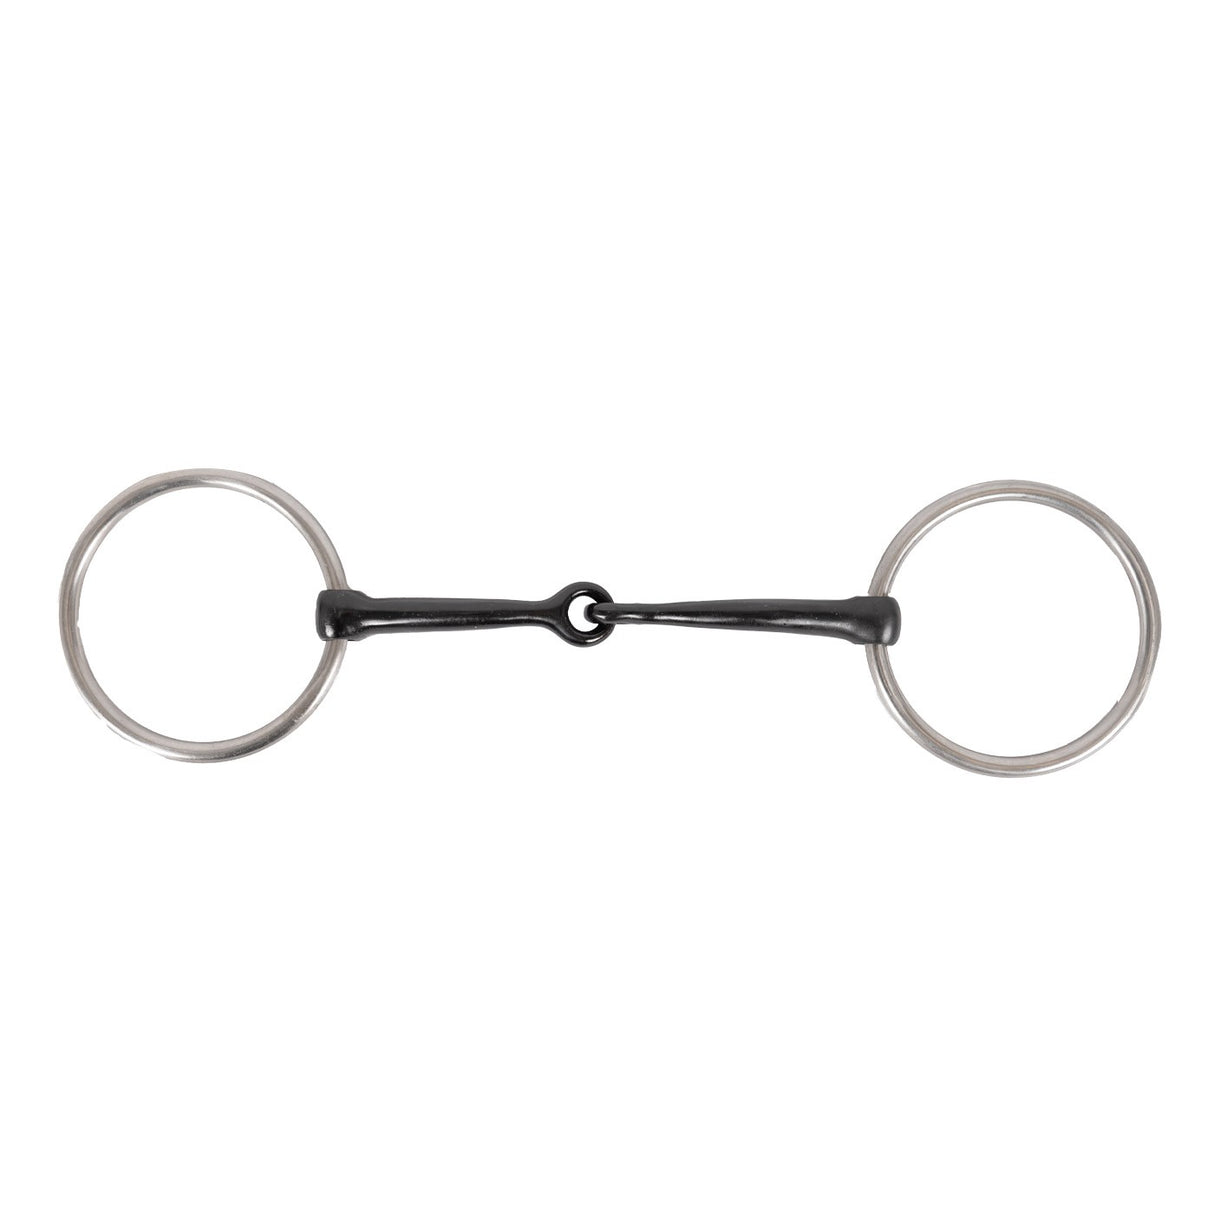 EvoEq Loose Ring Sweet Iron Snaffle Bit W/ Copper Inlay